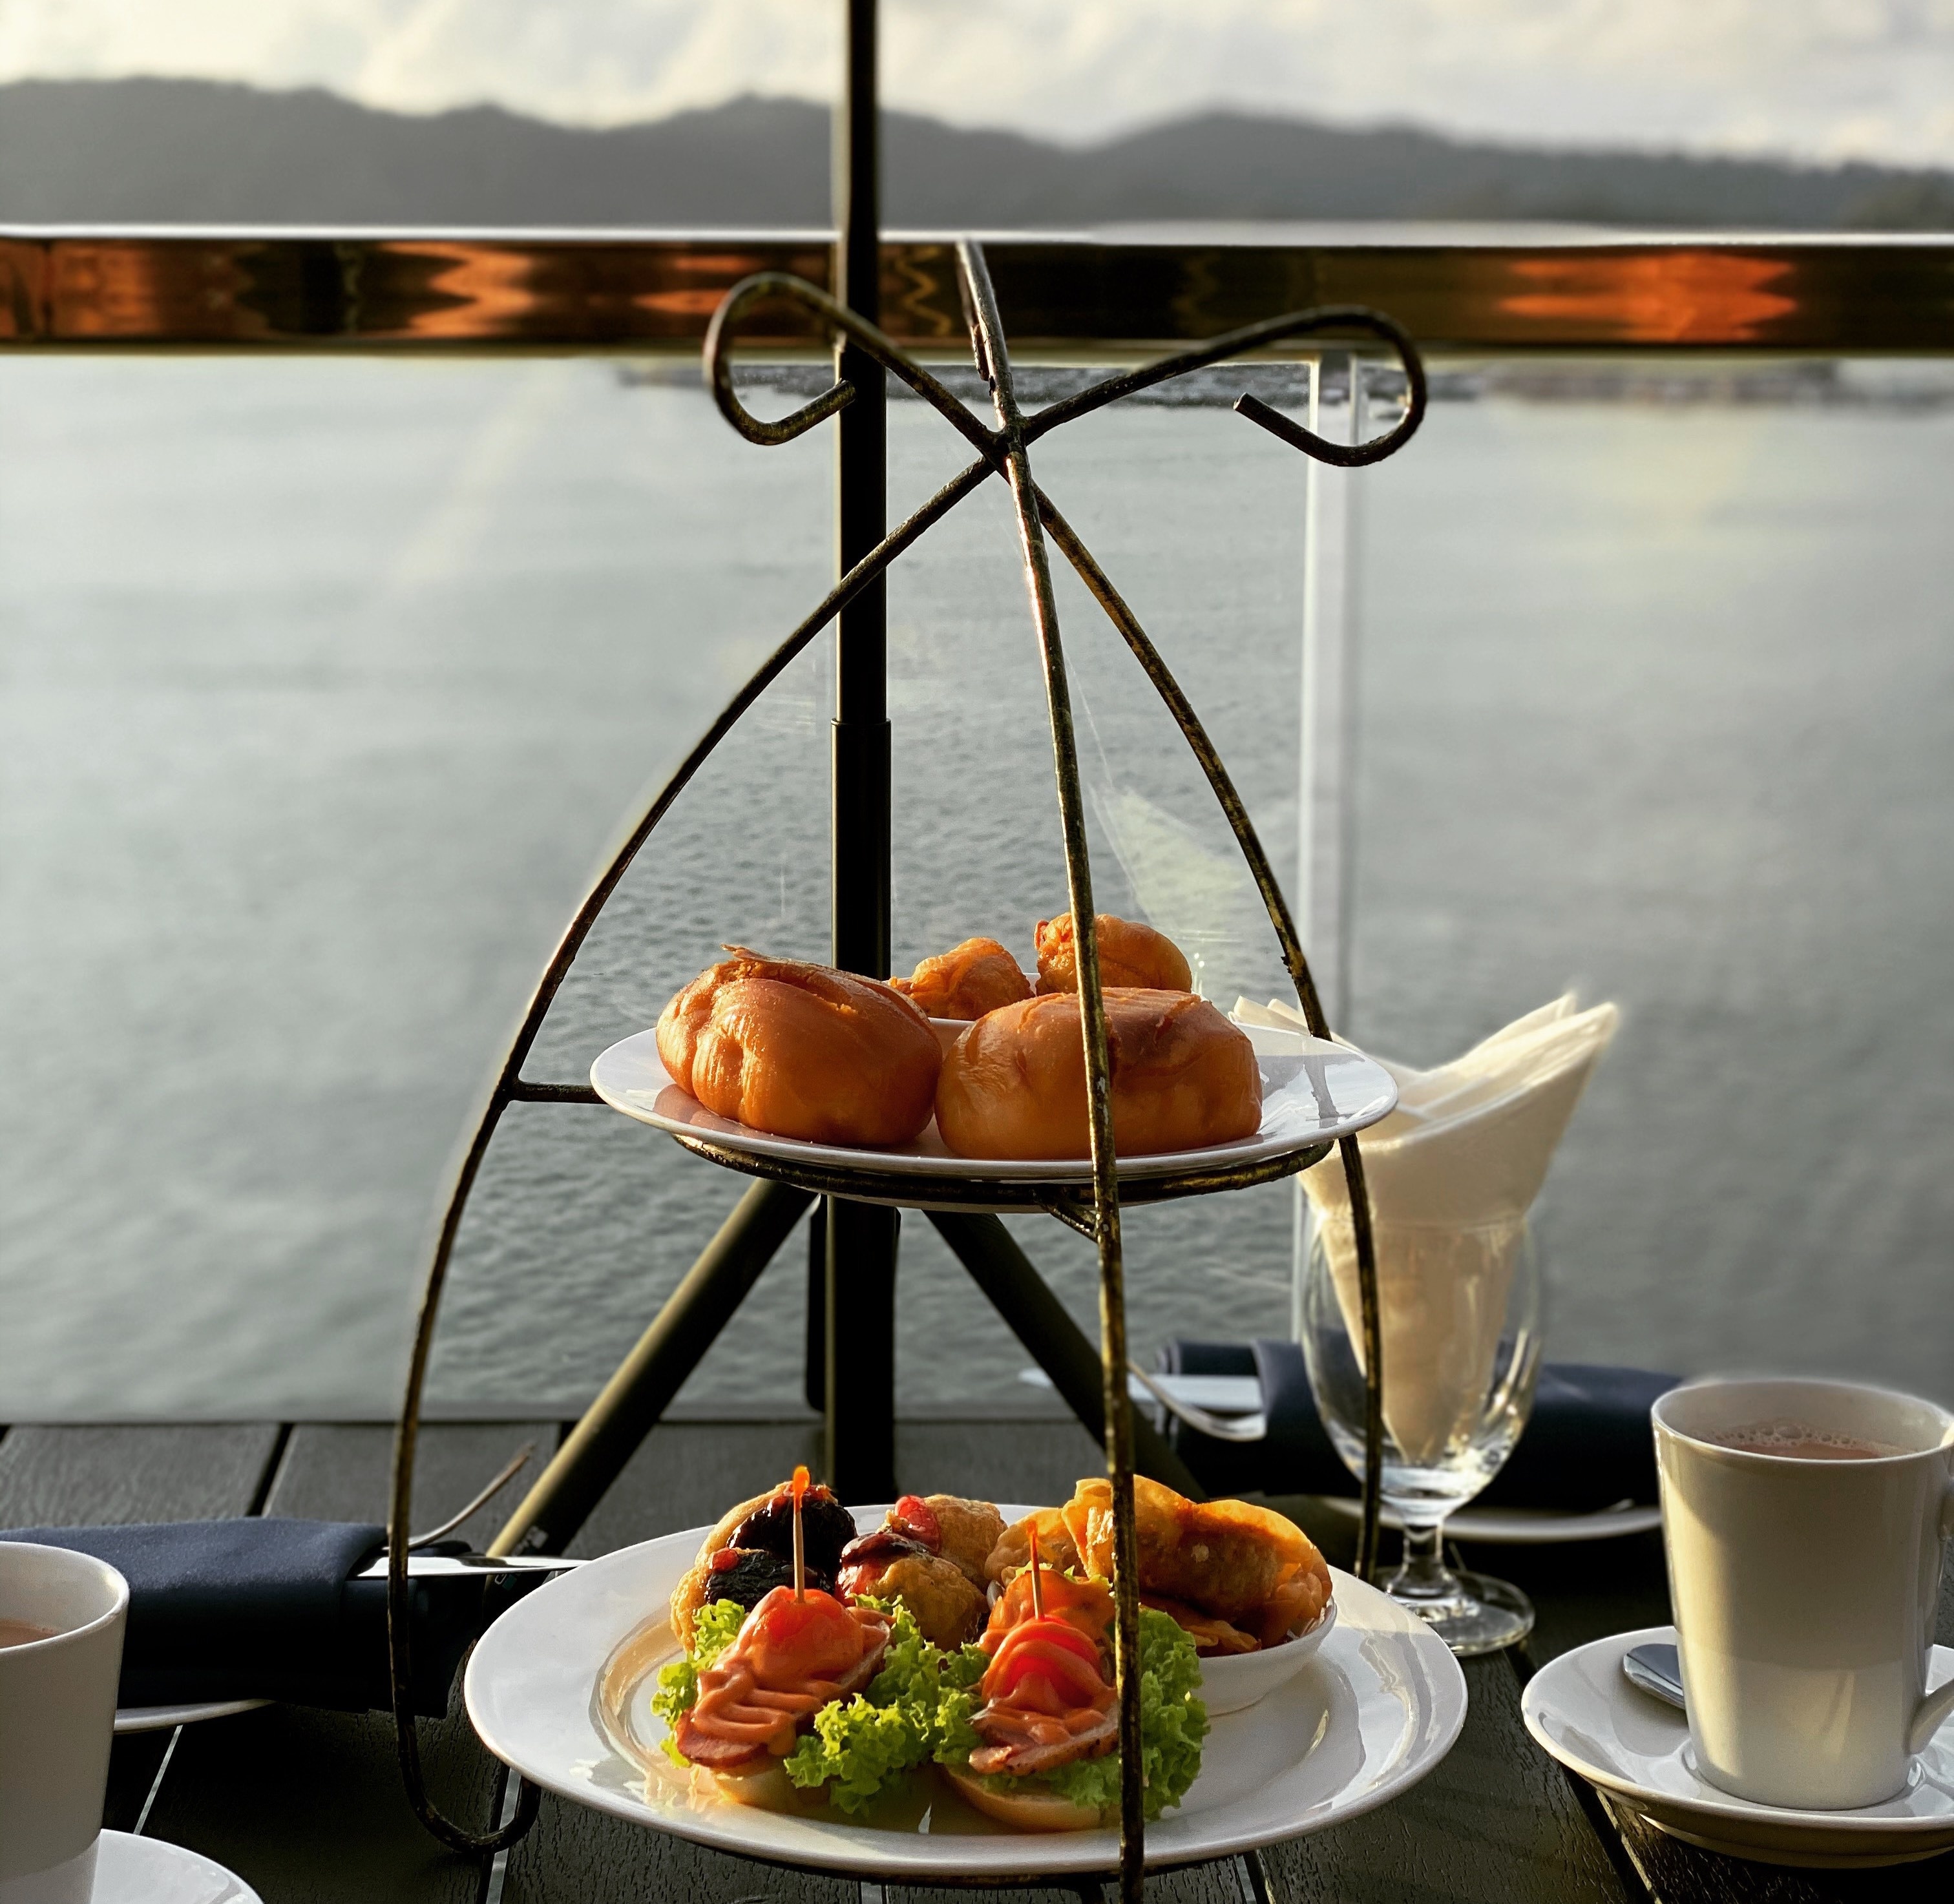 Enjoy hi-tea with a spectacular sunset view. This place is usually crowded on weekends and it’s first come first serve especially for the outer deck seats overlooking the sea.